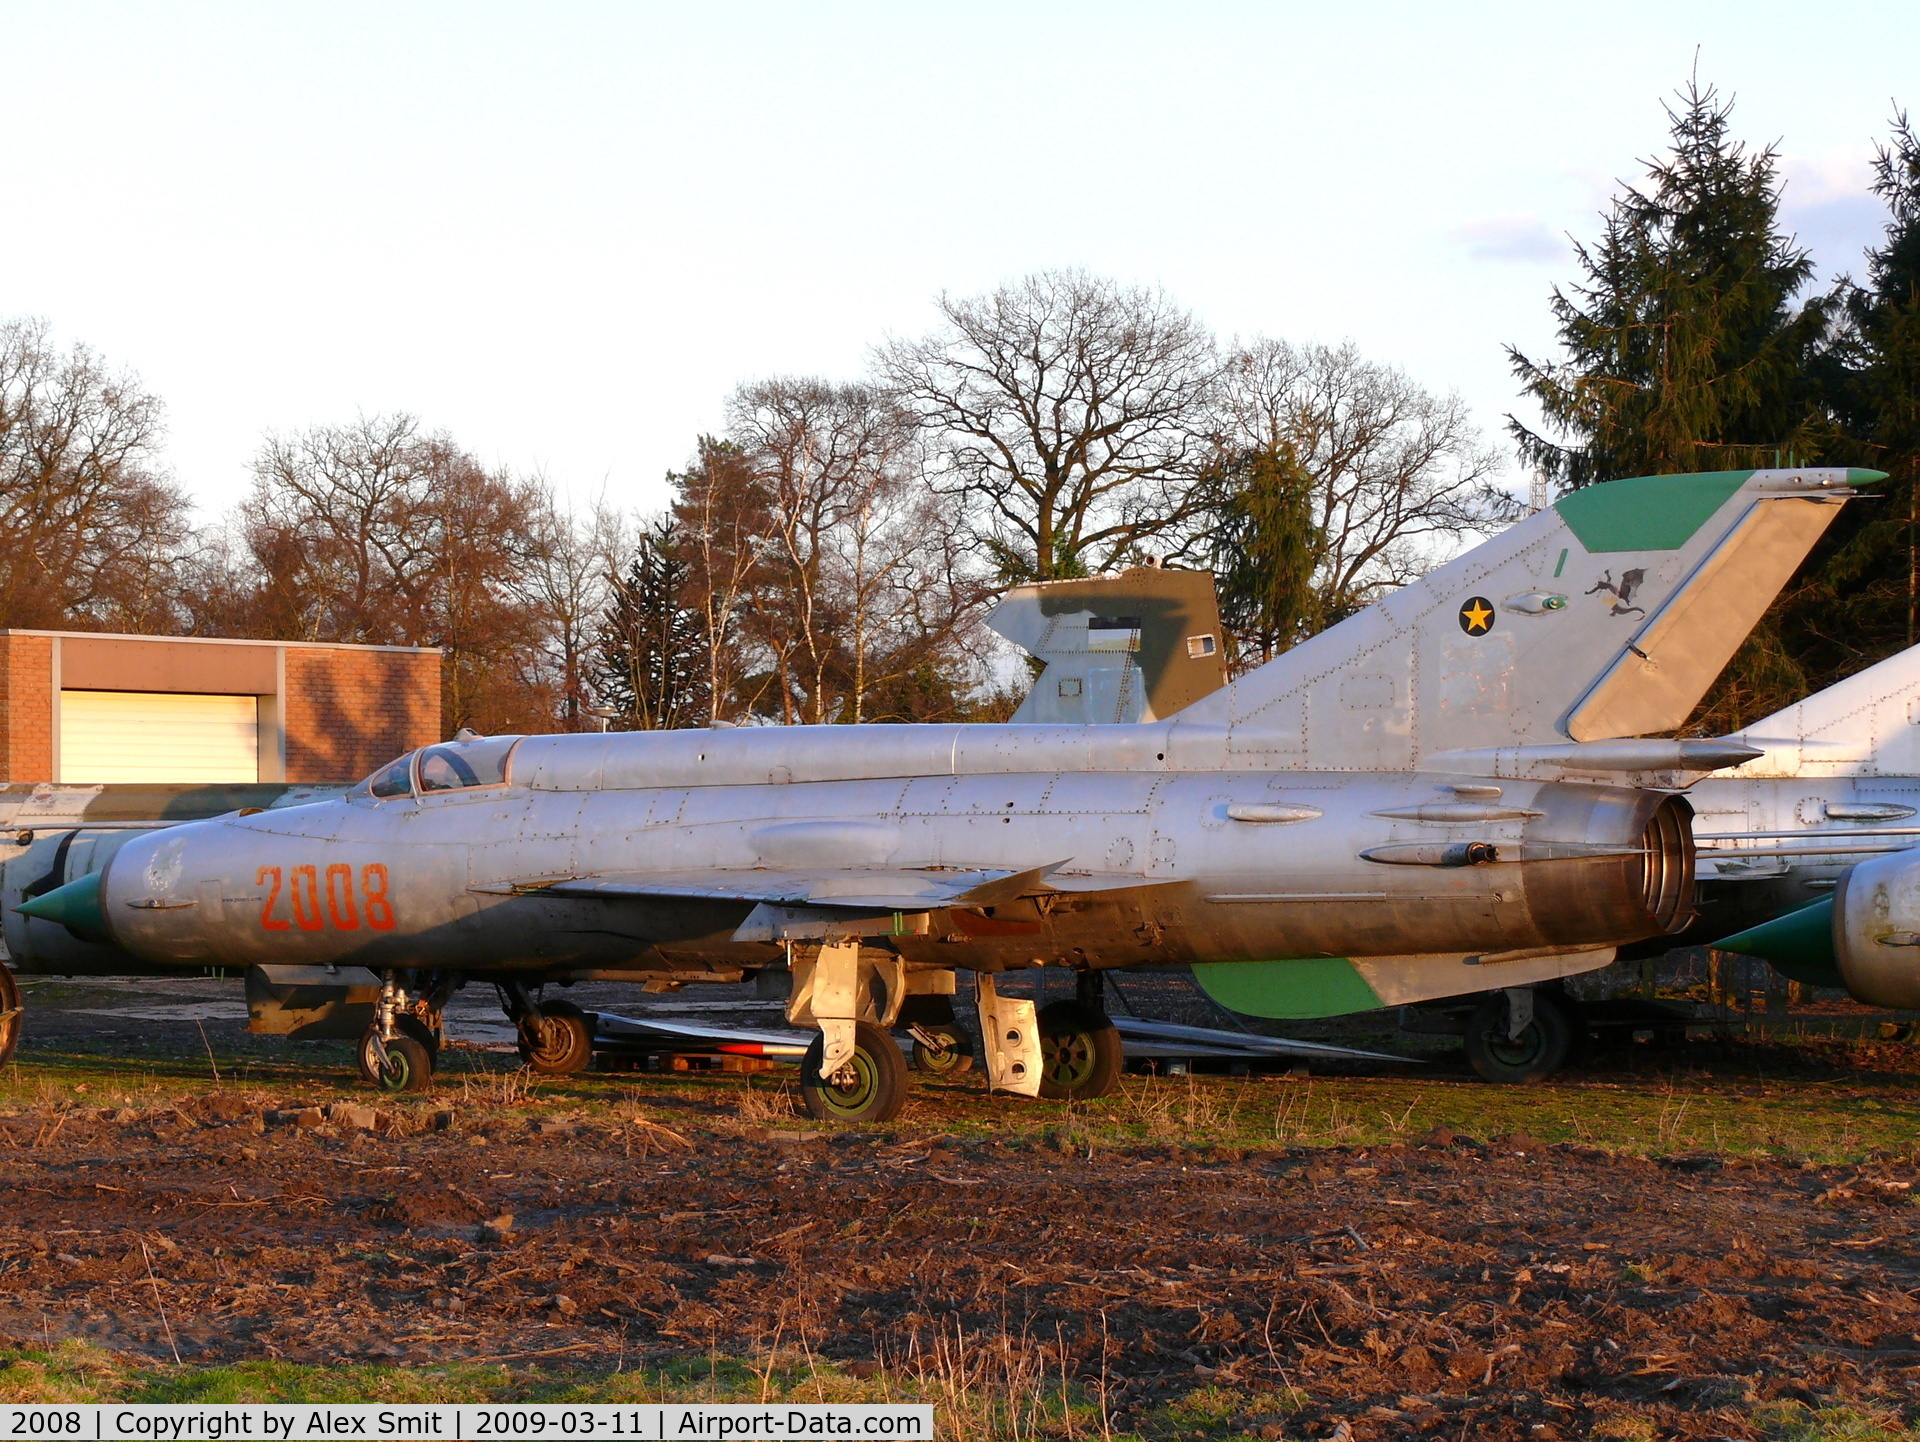 2008, 1976 Mikoyan-Gurevich MiG-21M C/N 962008, Mikoyan Mig21M Fishbed 2008 Polish Air Force part of the collection of Mr Piet Smets from Baarlo (PH) and stored in a small compound in Kessel (PH)